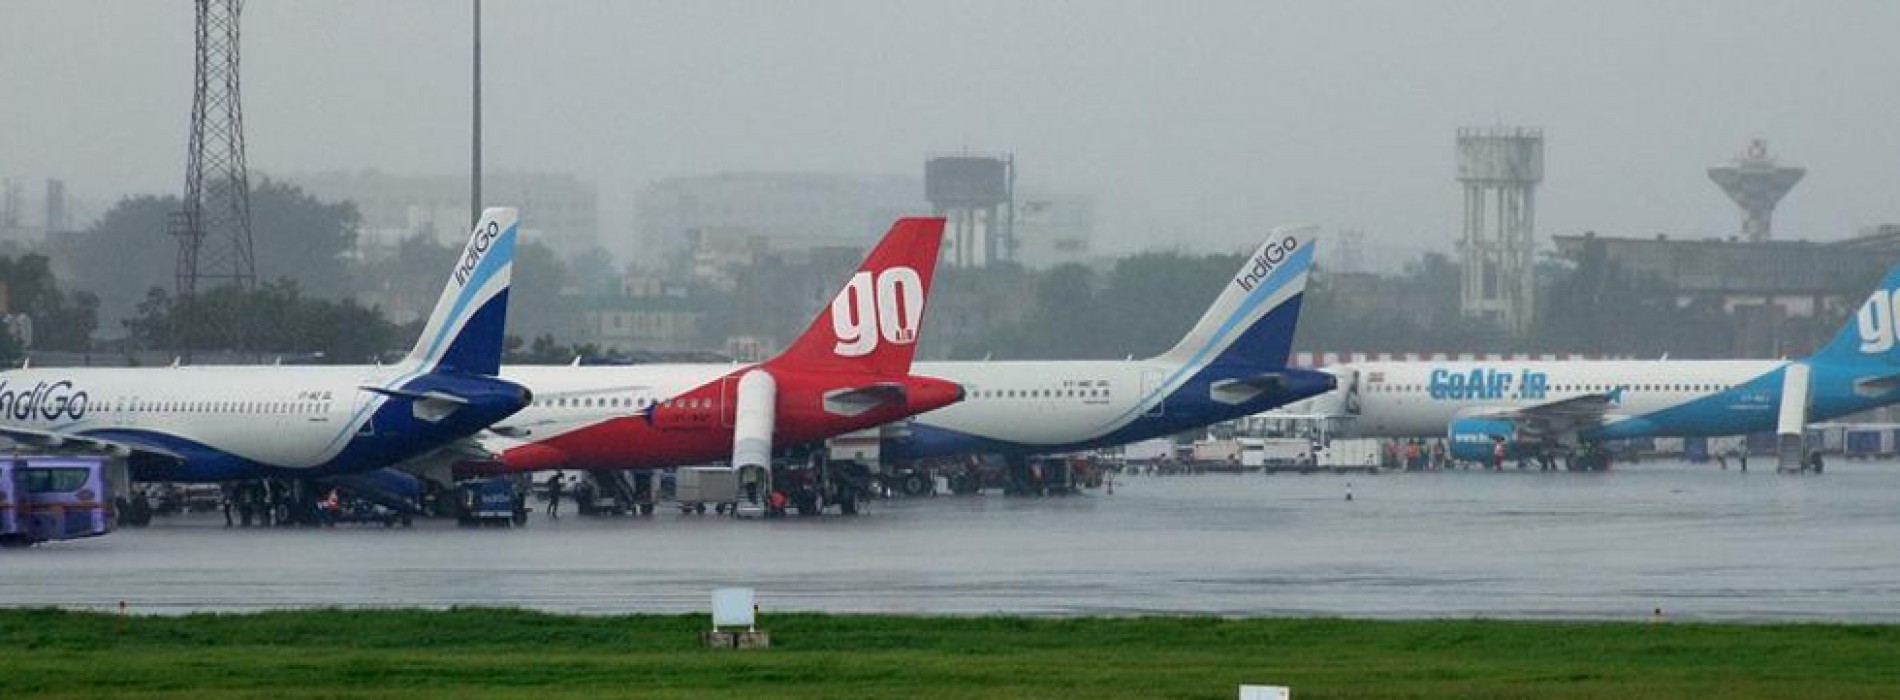 India domestic air traffic growth likely to slow in 2017 as per IATA